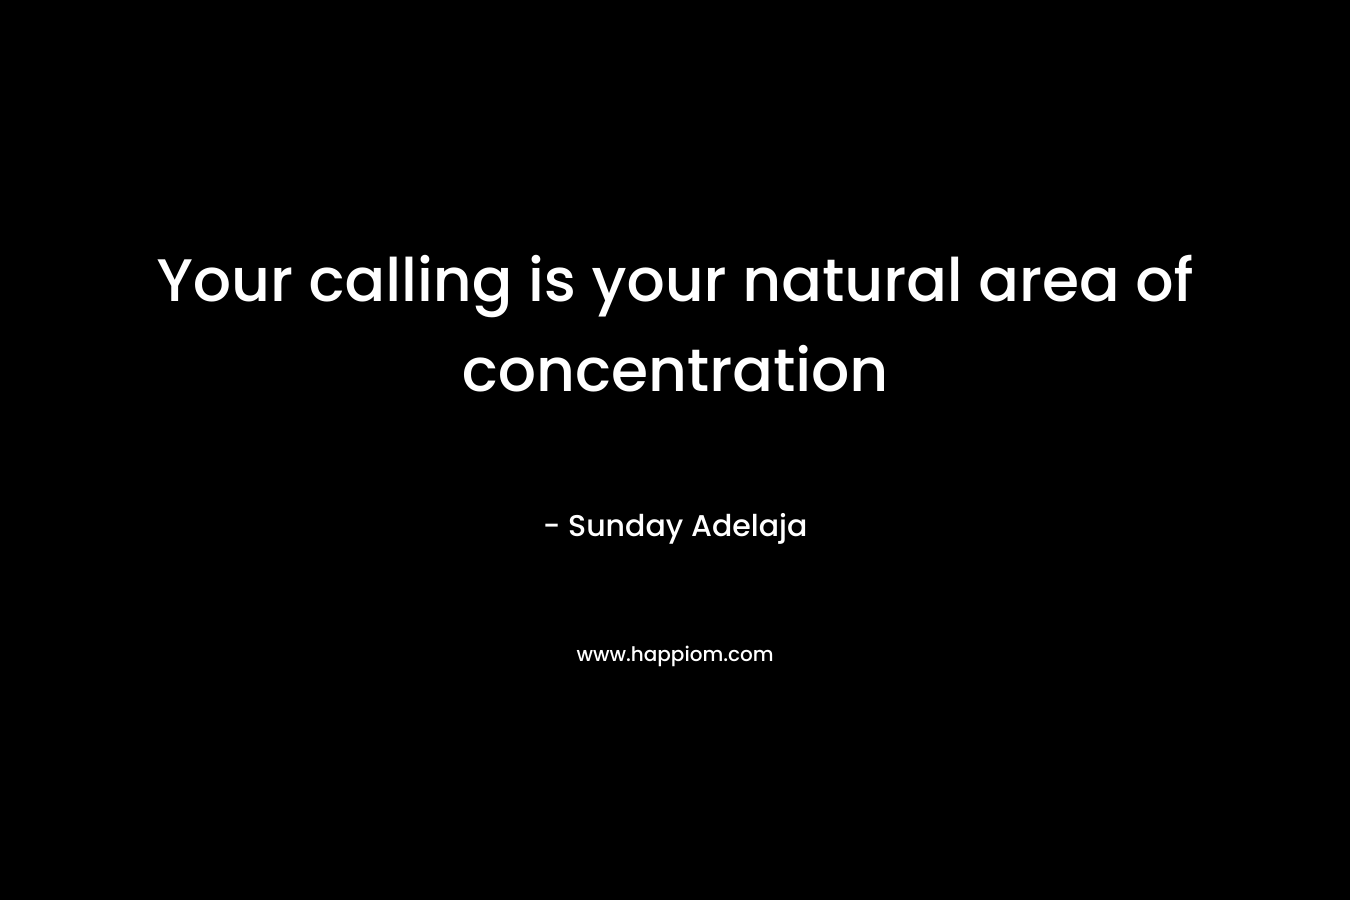 Your calling is your natural area of concentration